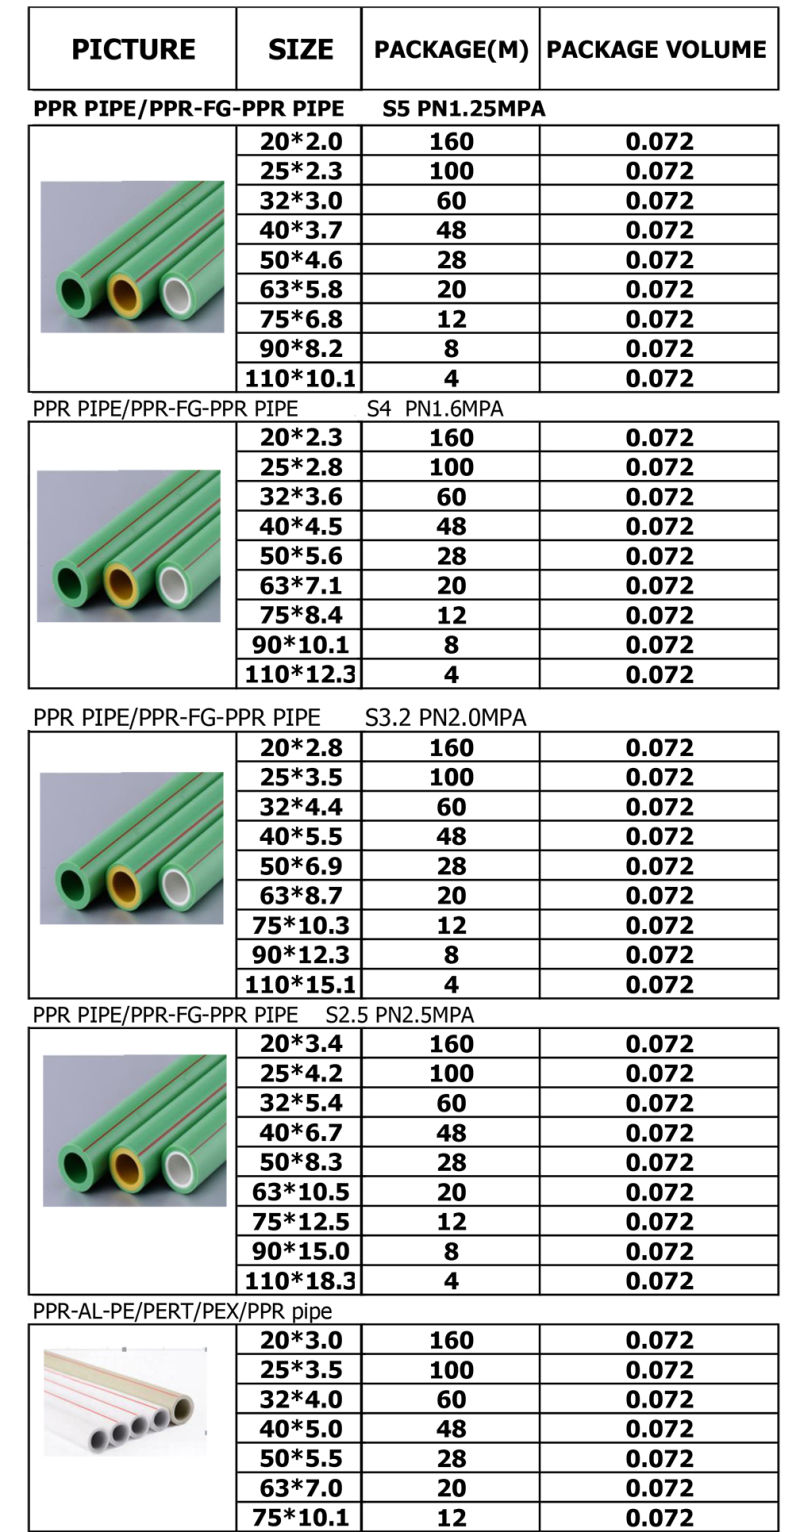 Hb-2042 PPR Pipe and Fitting DIN Standard PPR Pipe Fitting Dimension PPR Pipe Fittings Pdf PP-R Pipe Fitting